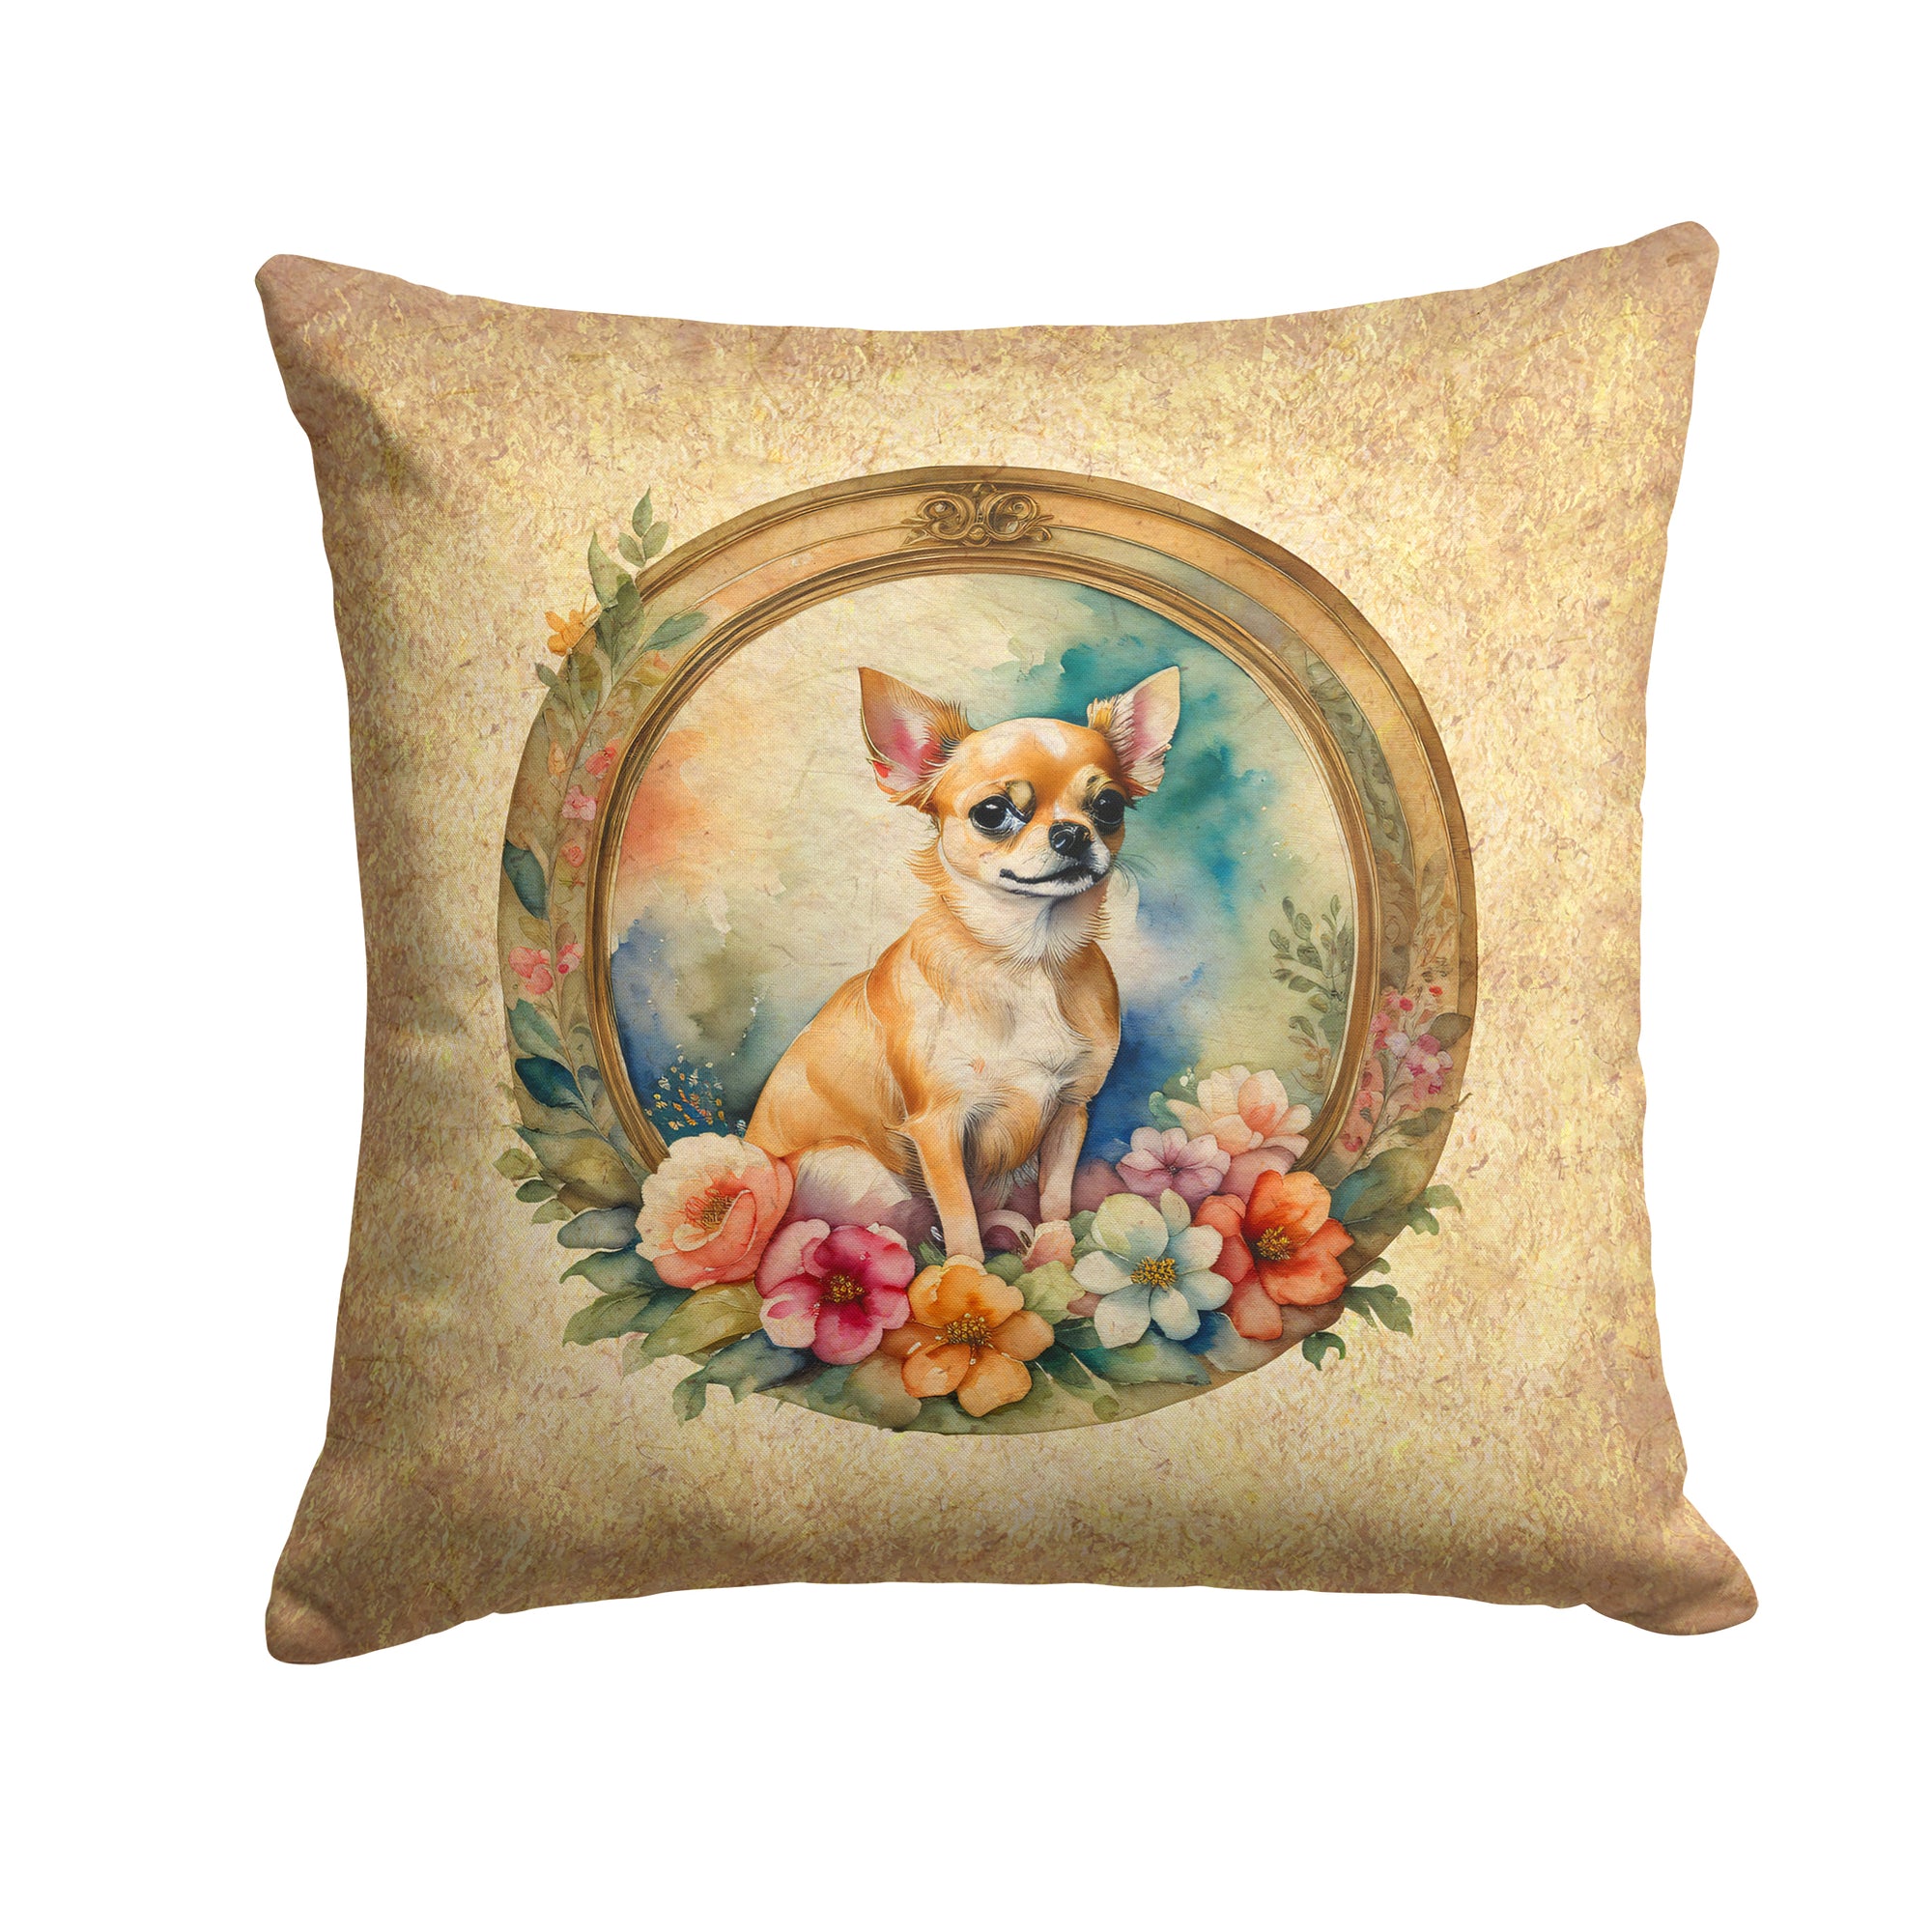 Buy this Chihuahua and Flowers Fabric Decorative Pillow